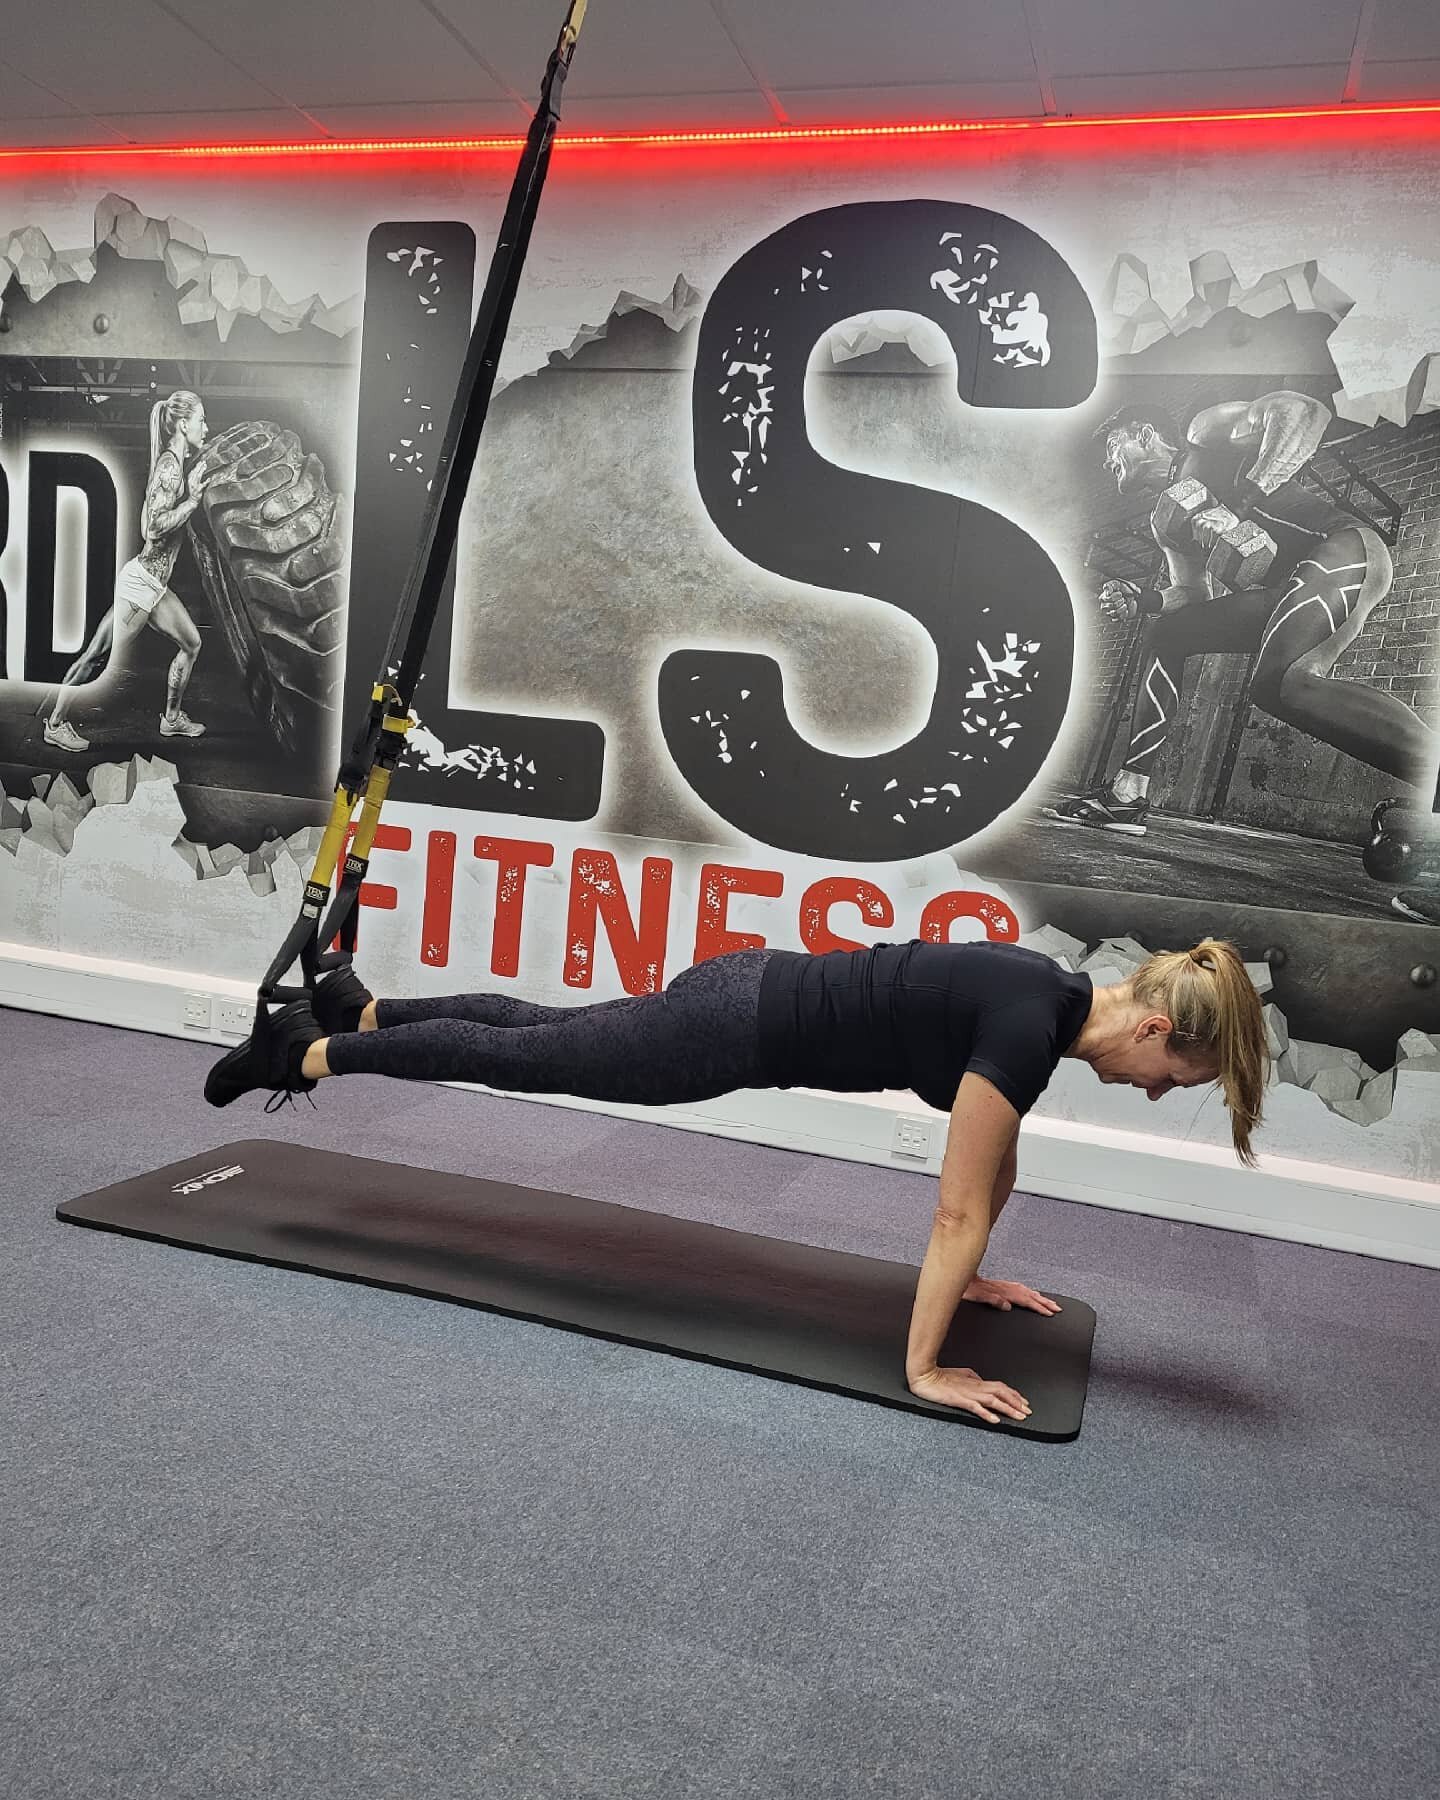 Our very own Pilates instructor showing good core strength doing suspended mountain climbers 🥵
#coreworkout 
#trx 
#pilatesinstructor 
#blackburnbased
#personaltrainingstudio 
#workhardneverquit